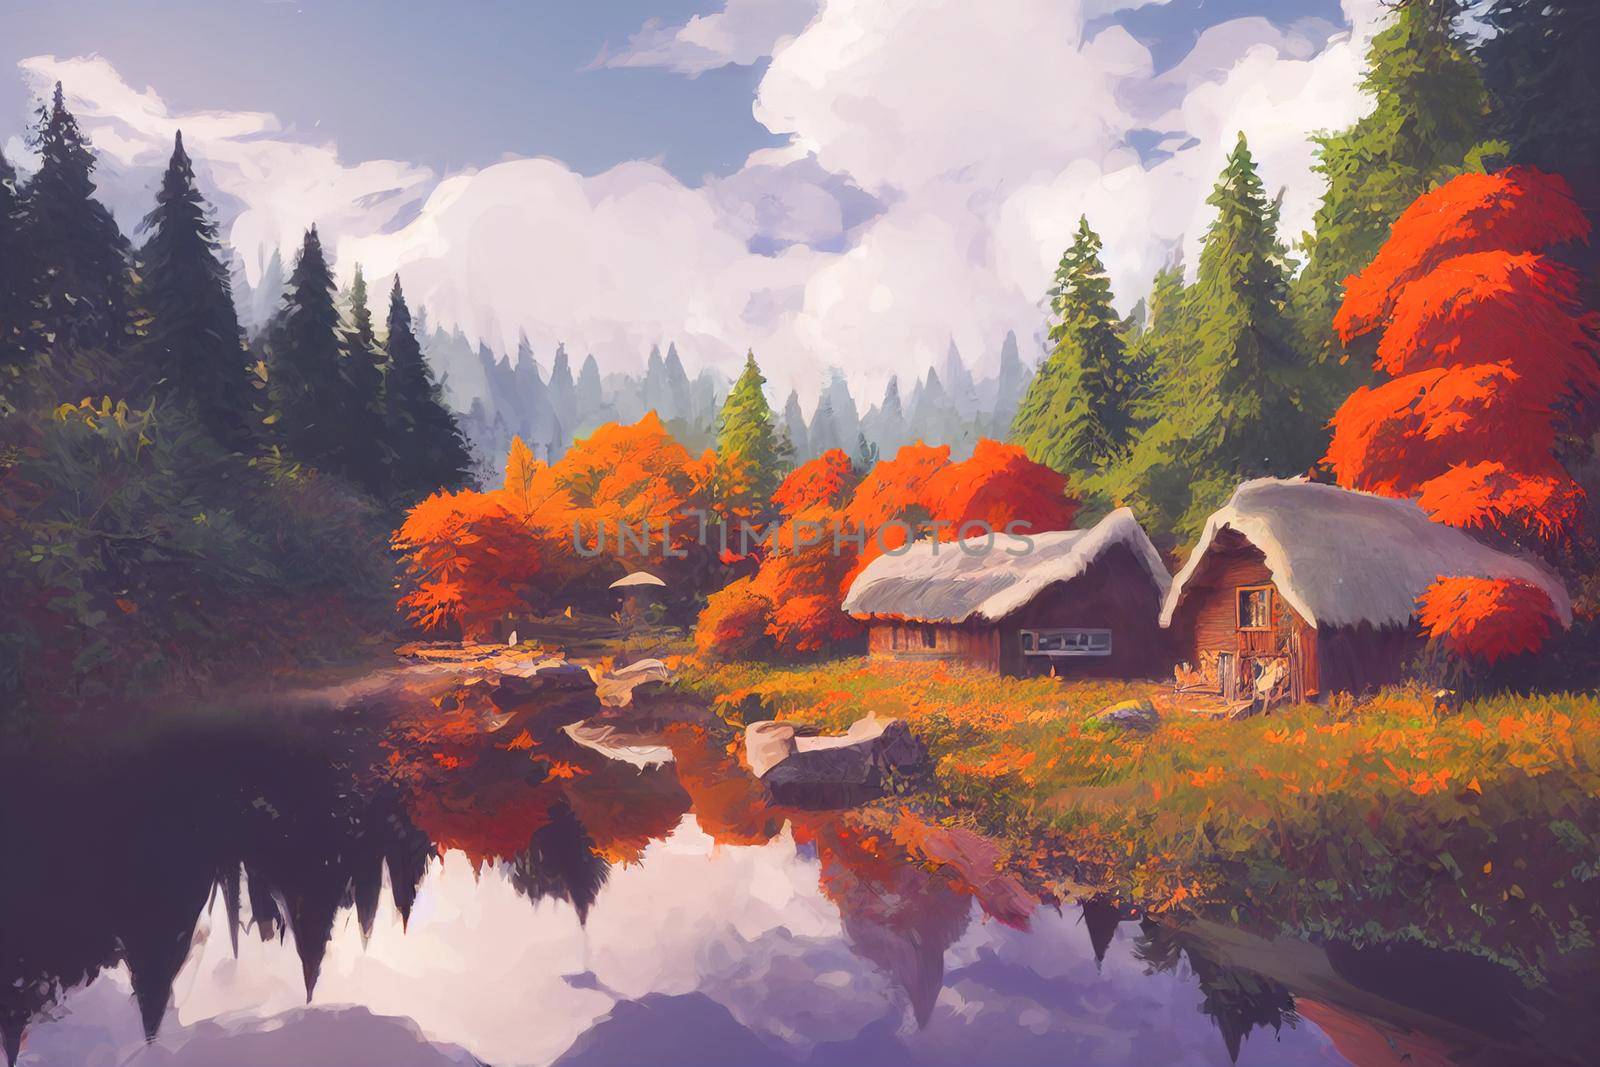 3D render digital painting of cabin near a river in the redwood forest. Autumn wallpaper theme.